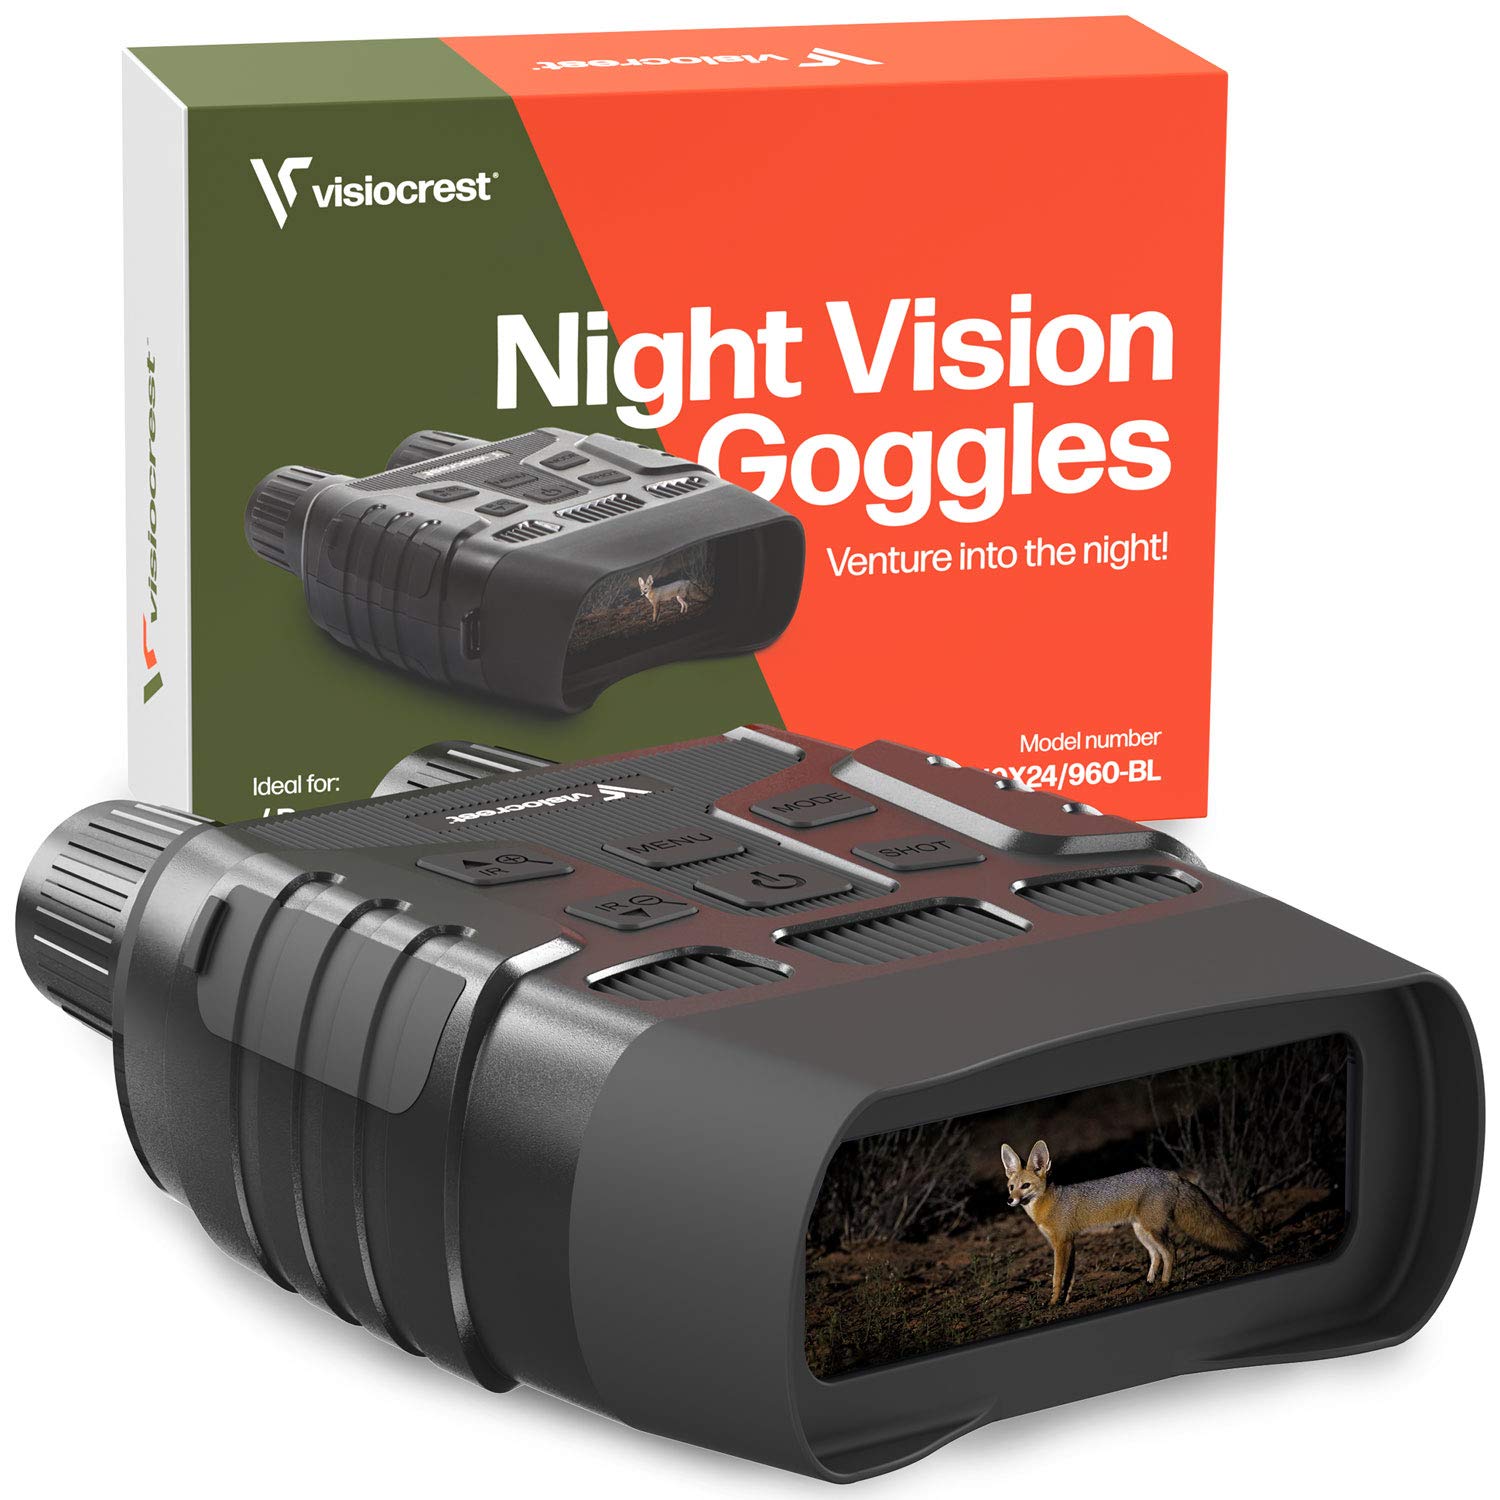 Infrared Night Vision Goggles for Hunting, Spotting and Surveillance - Digital Infrared Binoculars with 100% Clear Vision in Darkness 32GB Memory Card